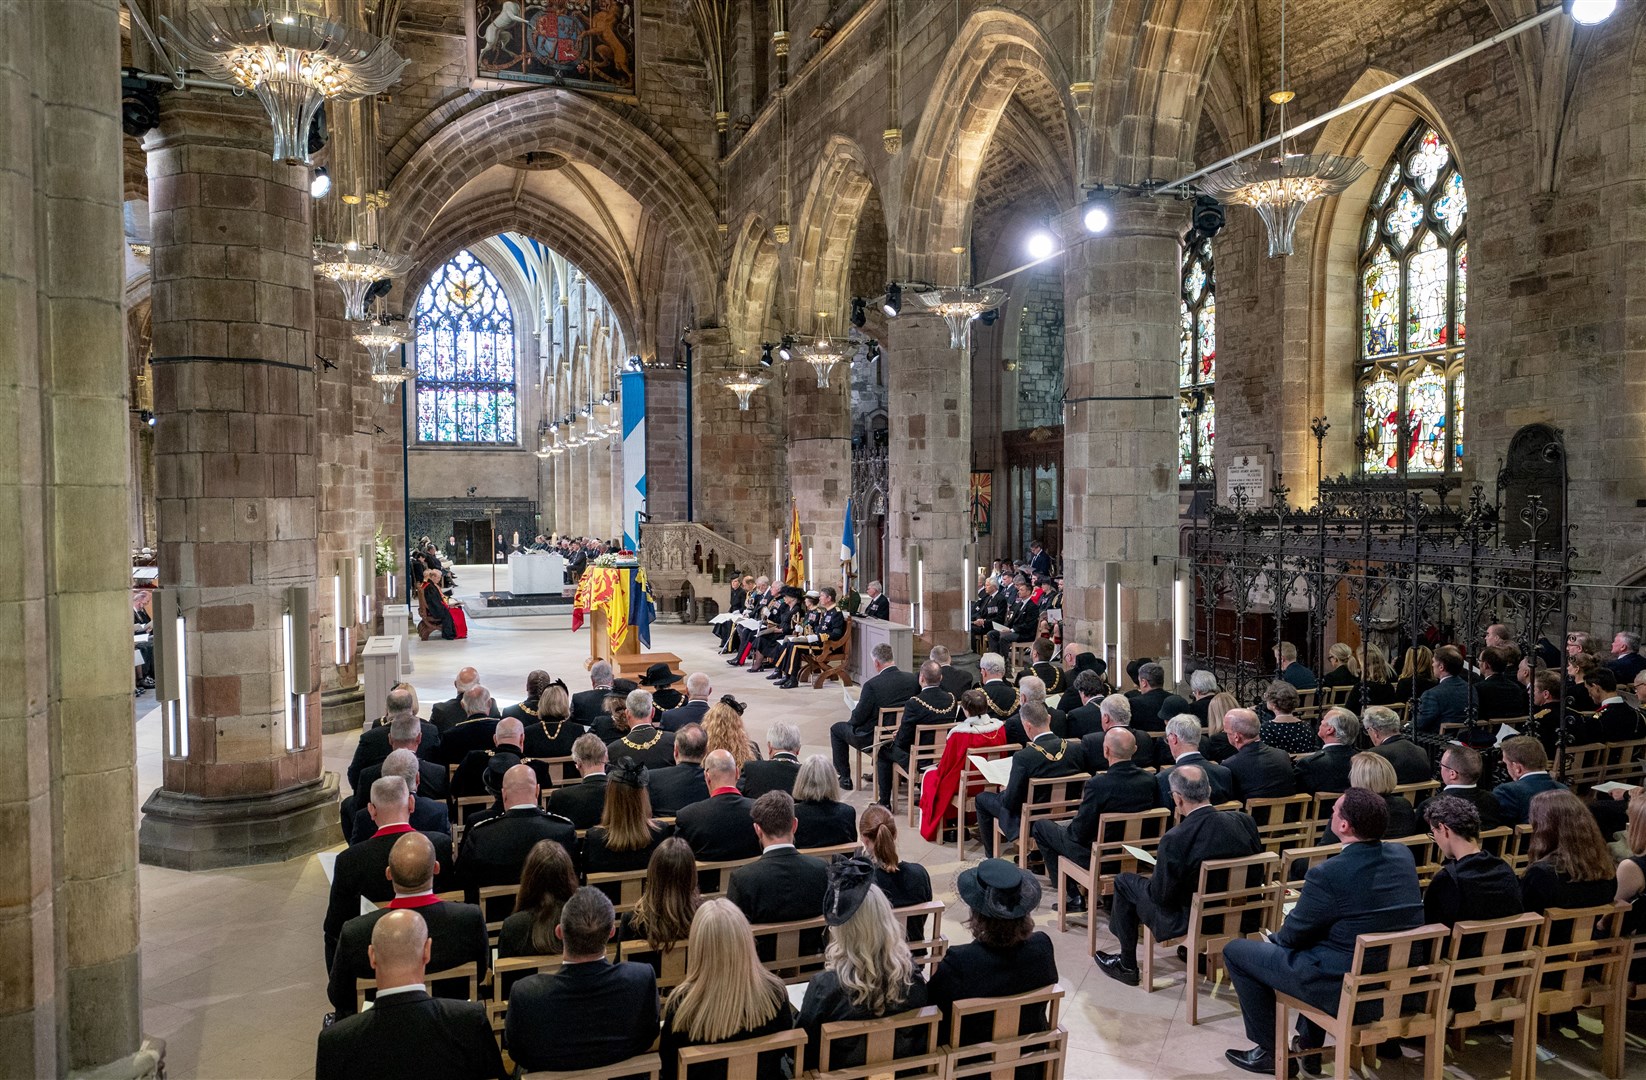 King Charles III, the Queen Consort and other members of the royal family attend the service at St Giles’ Cathedral (Jane Barlow/PA)